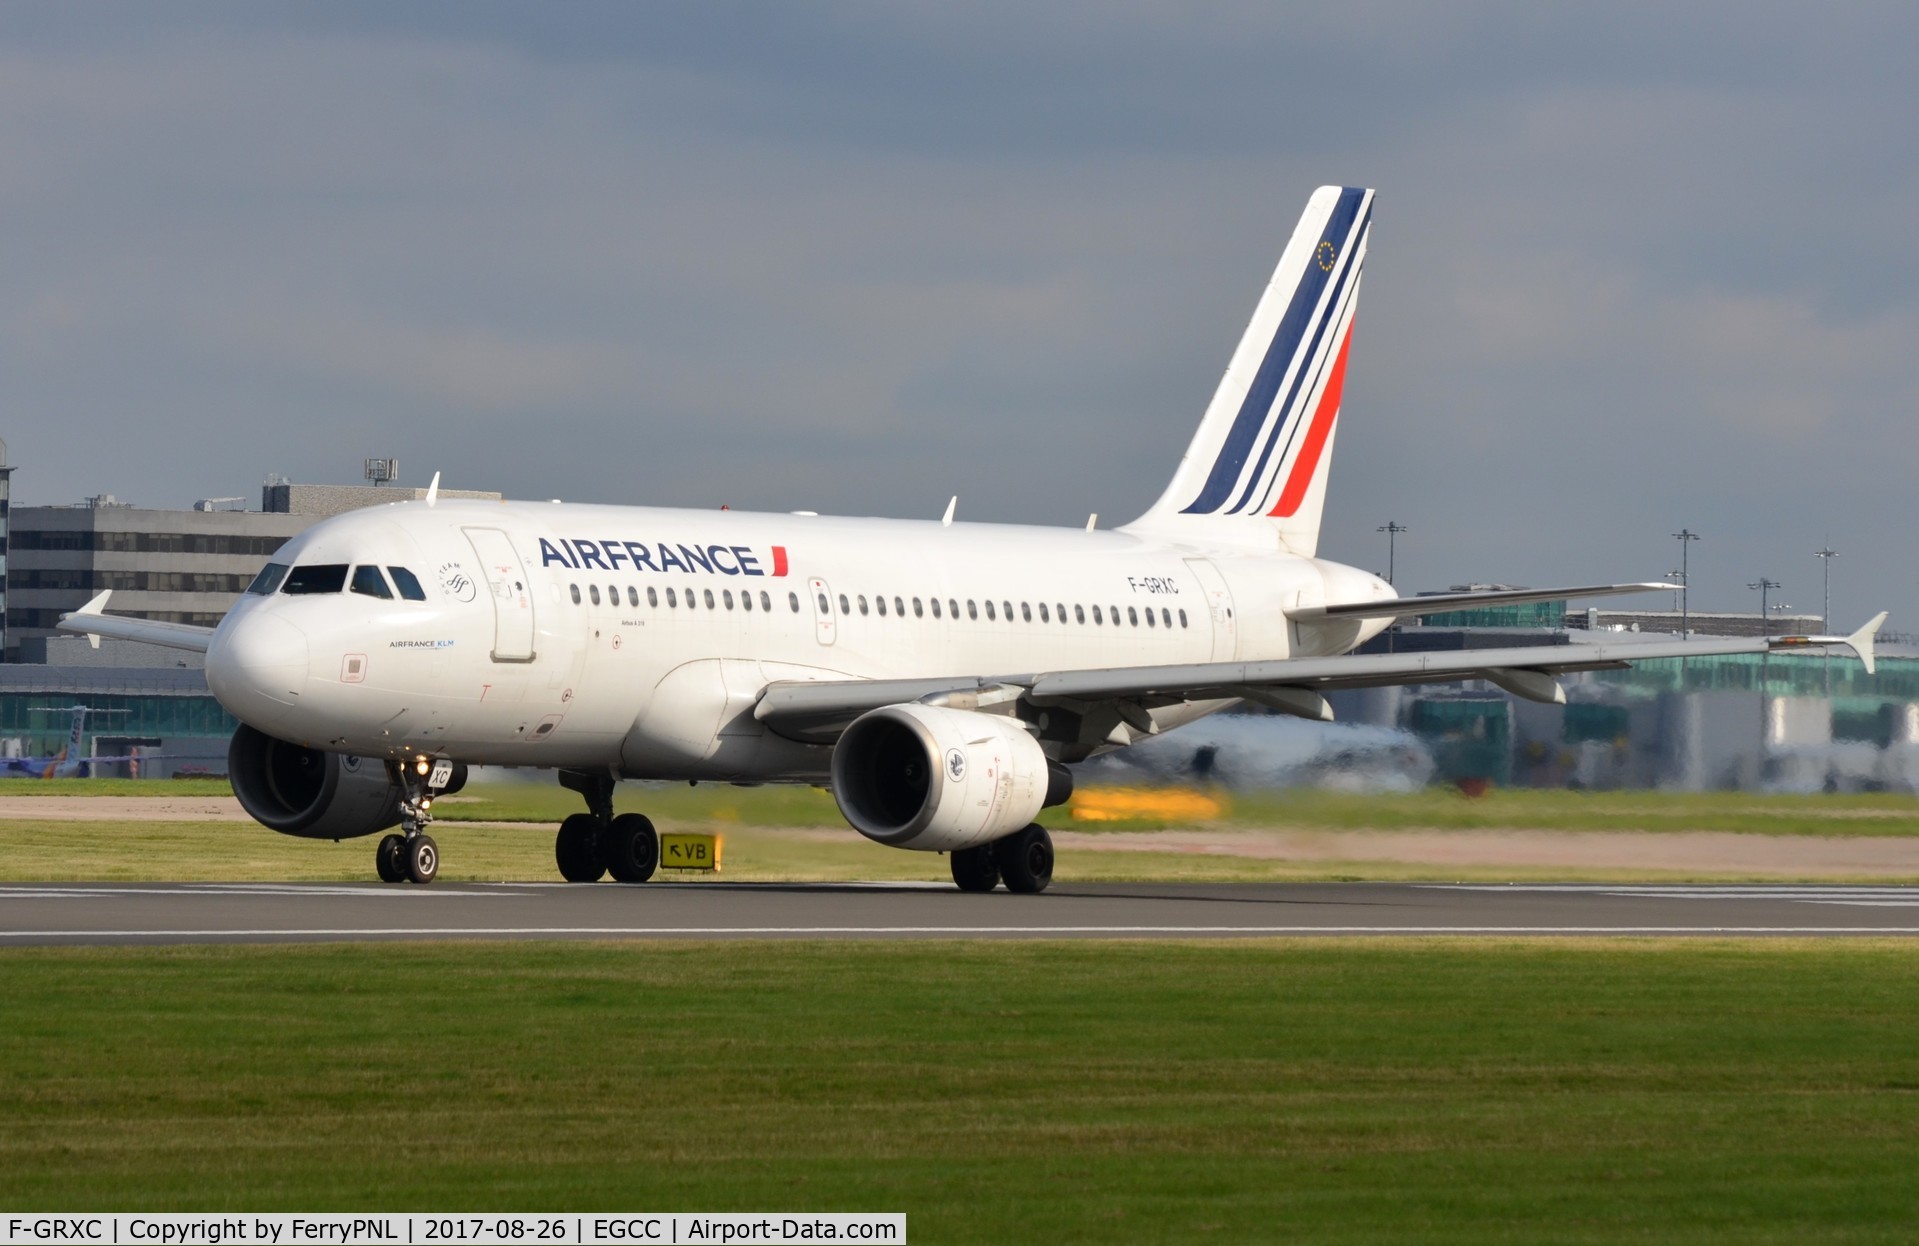 F-GRXC, 2002 Airbus A319-111 C/N 1677, Departure of Air France A319